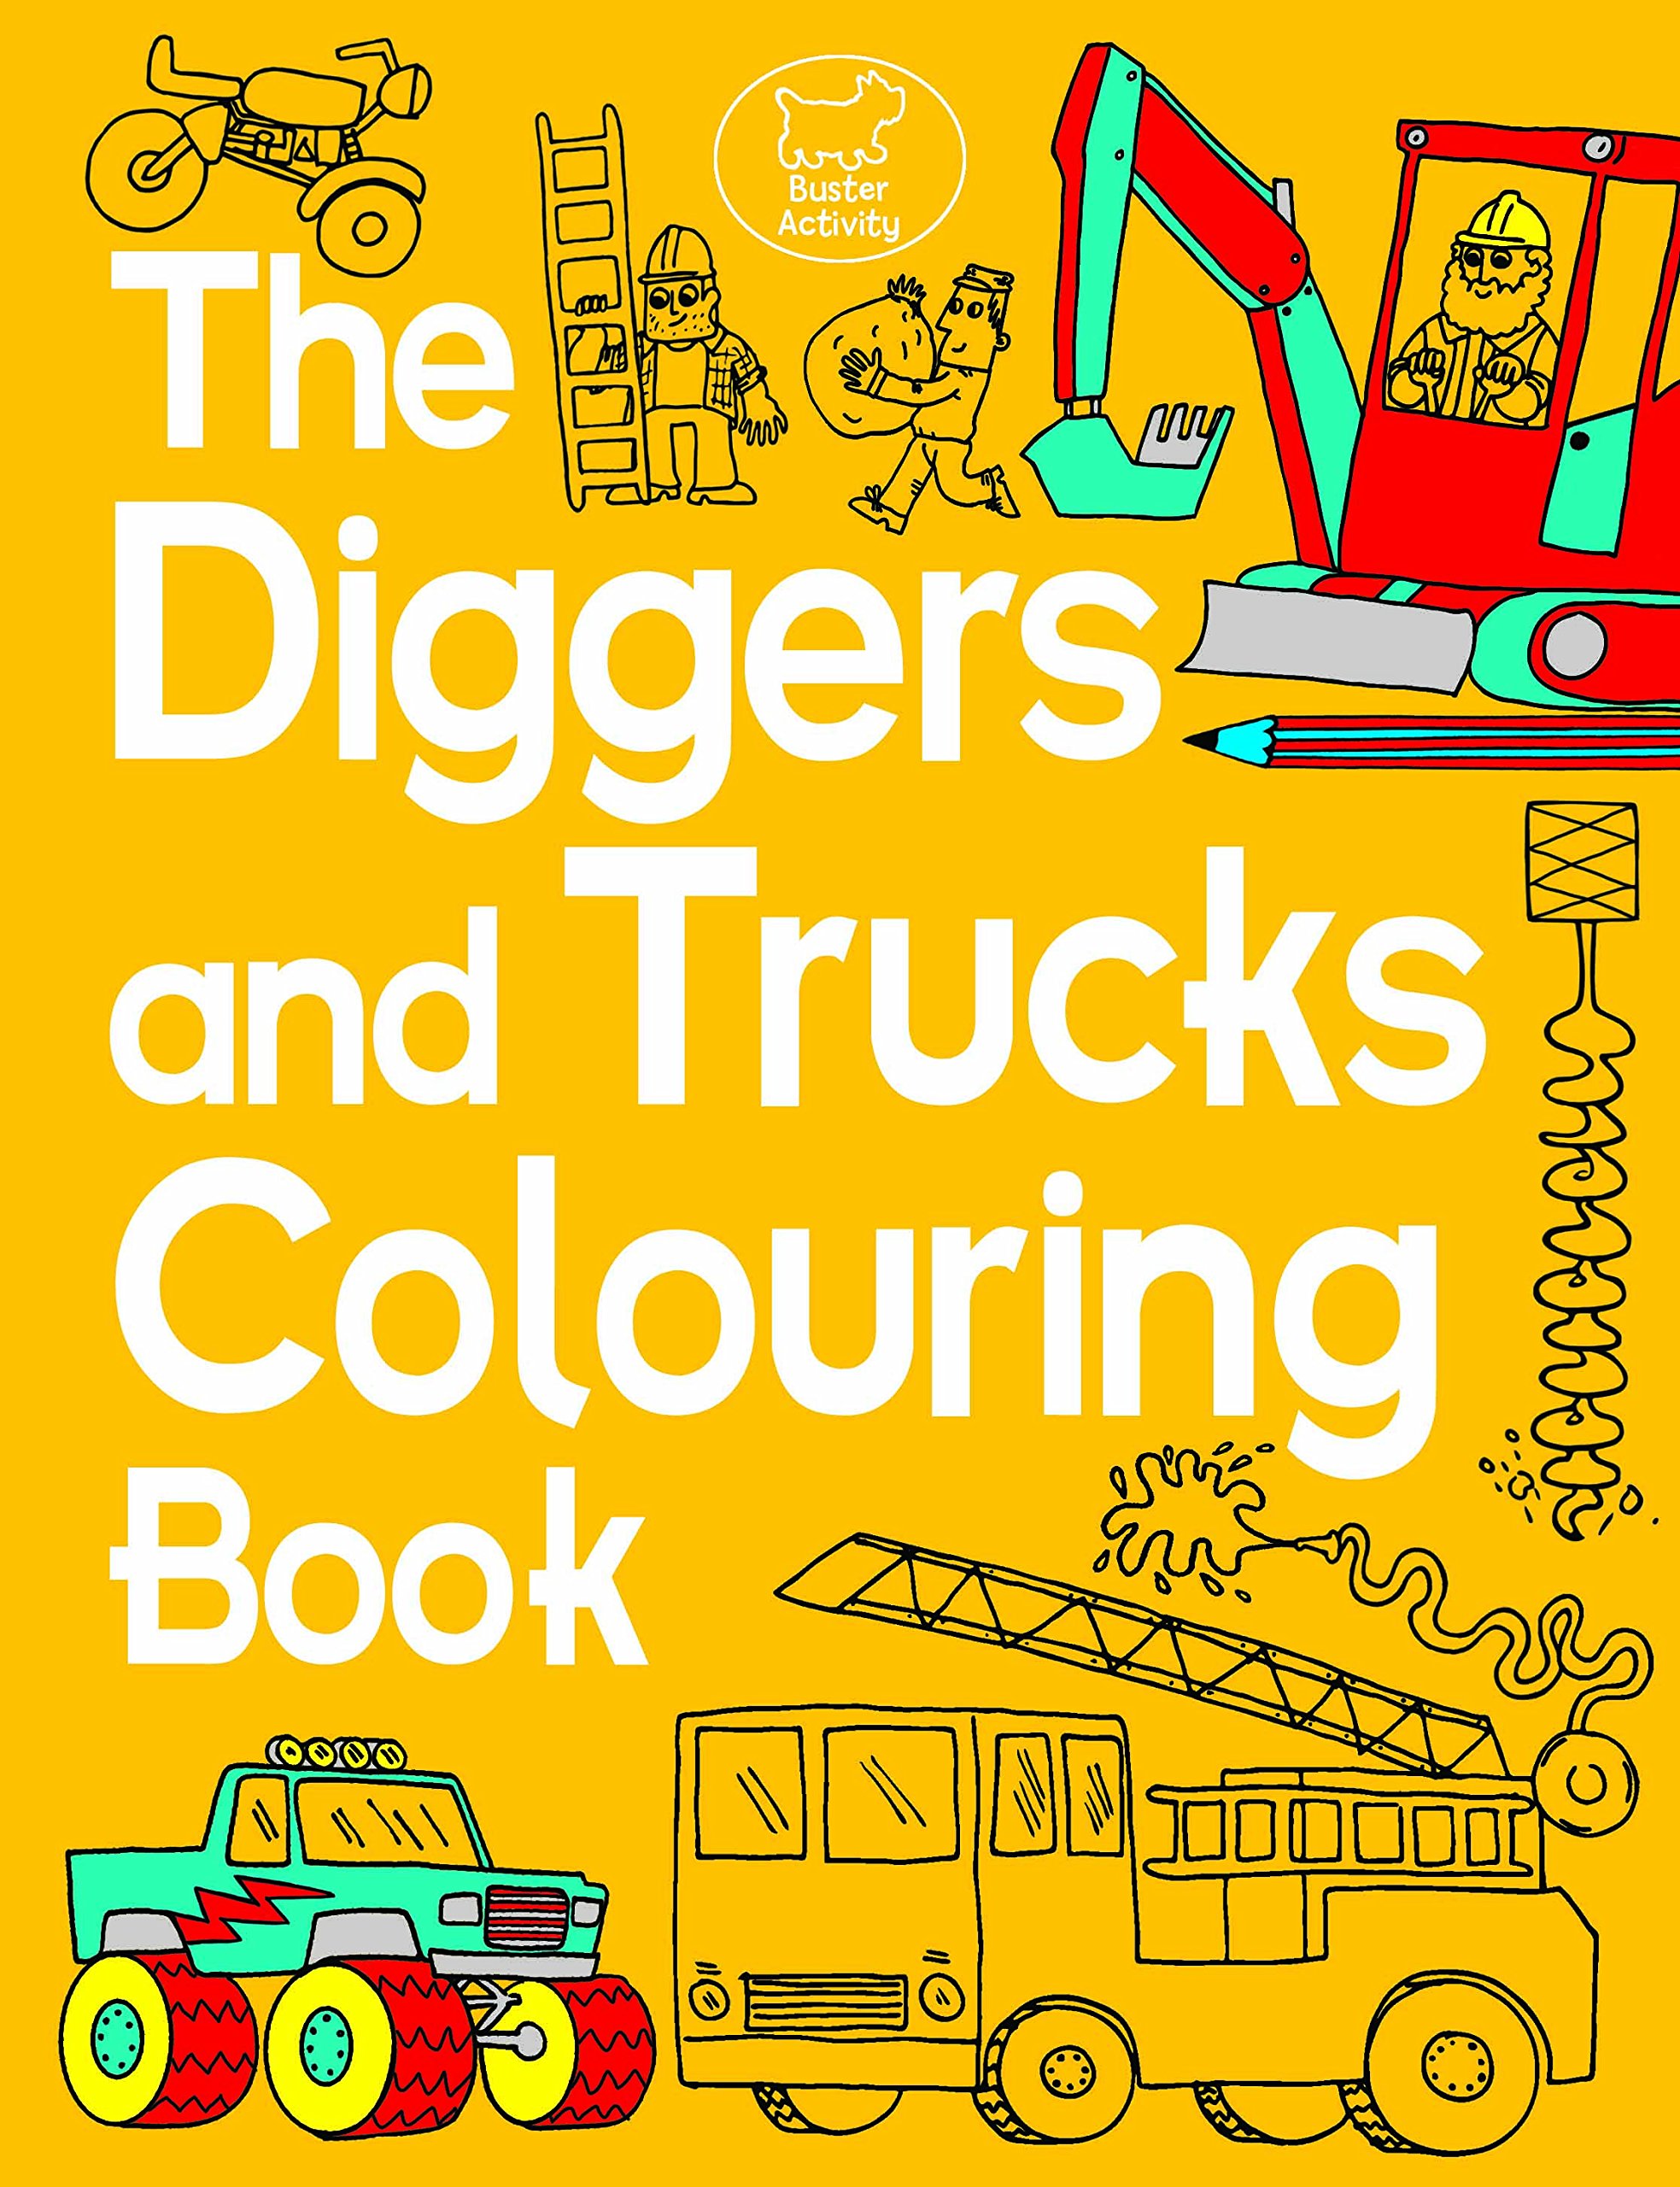 The Diggers and Trucks Colouring Book - Chris Dickason